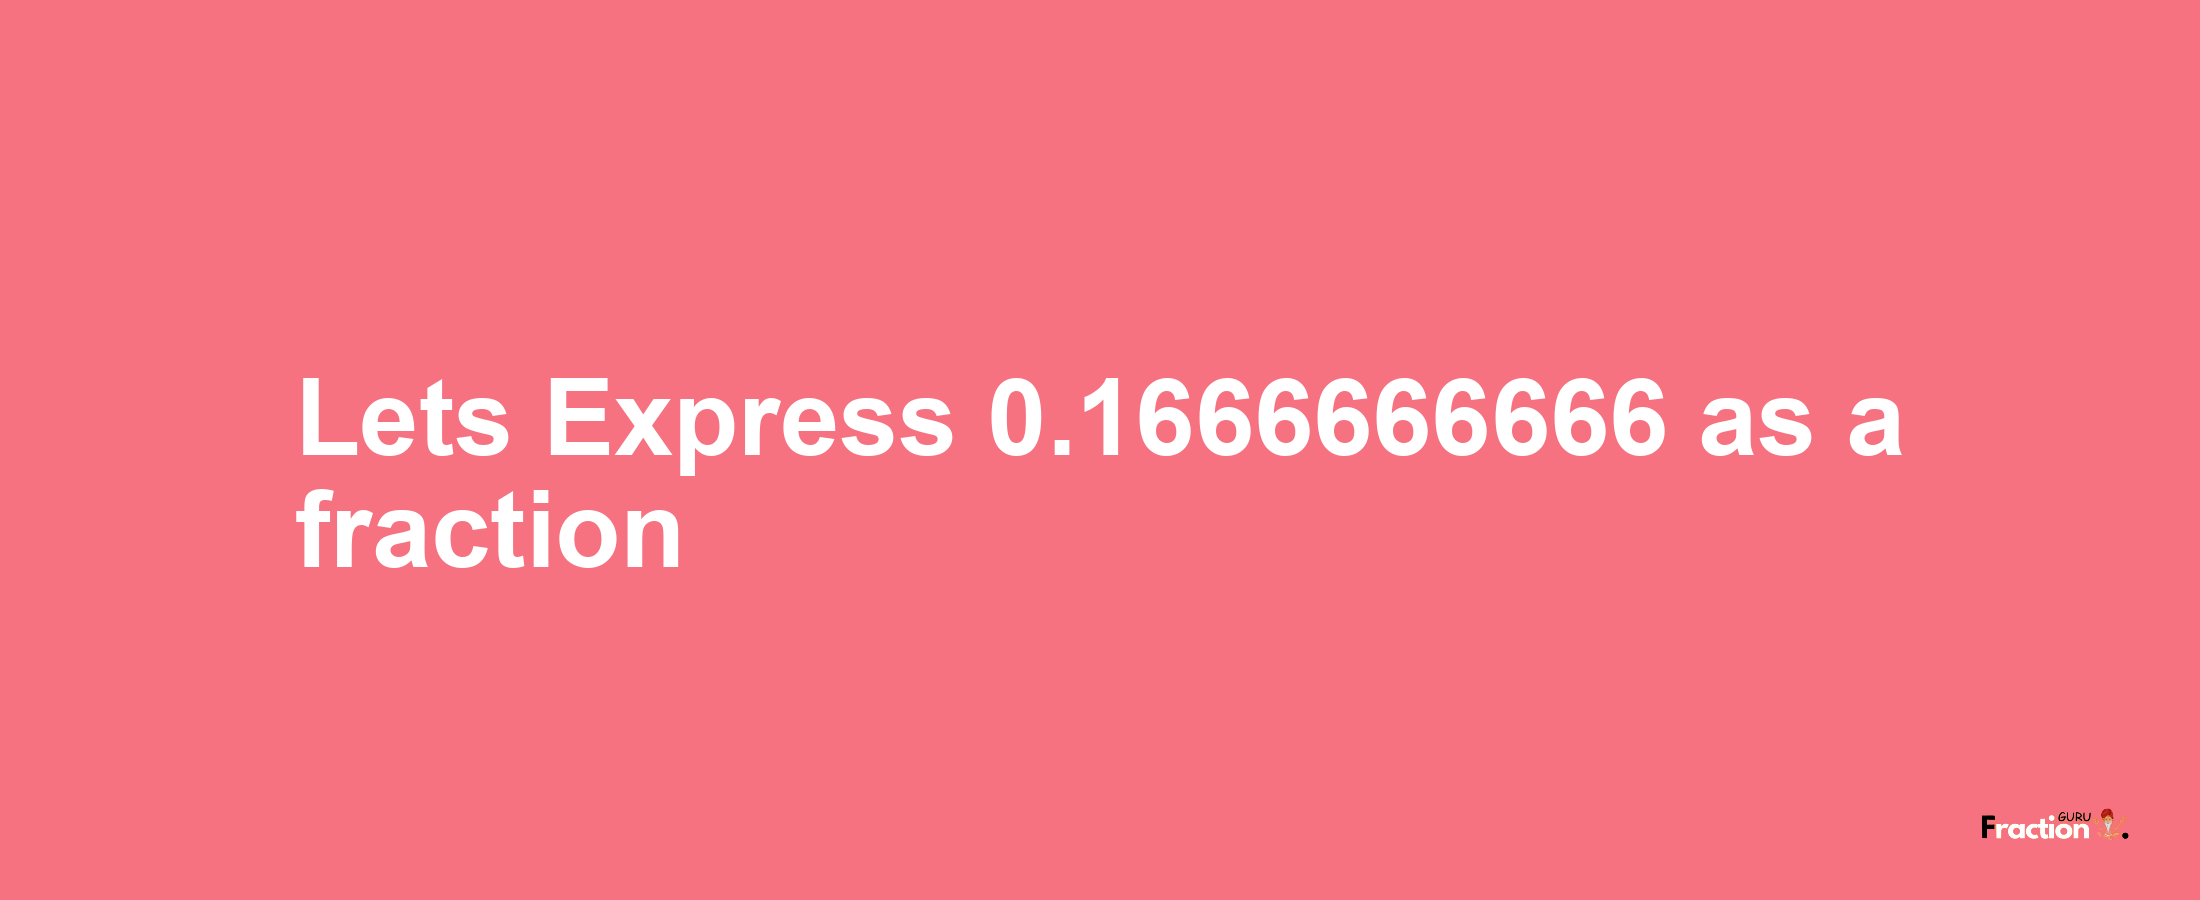 Lets Express 0.1666666666 as afraction